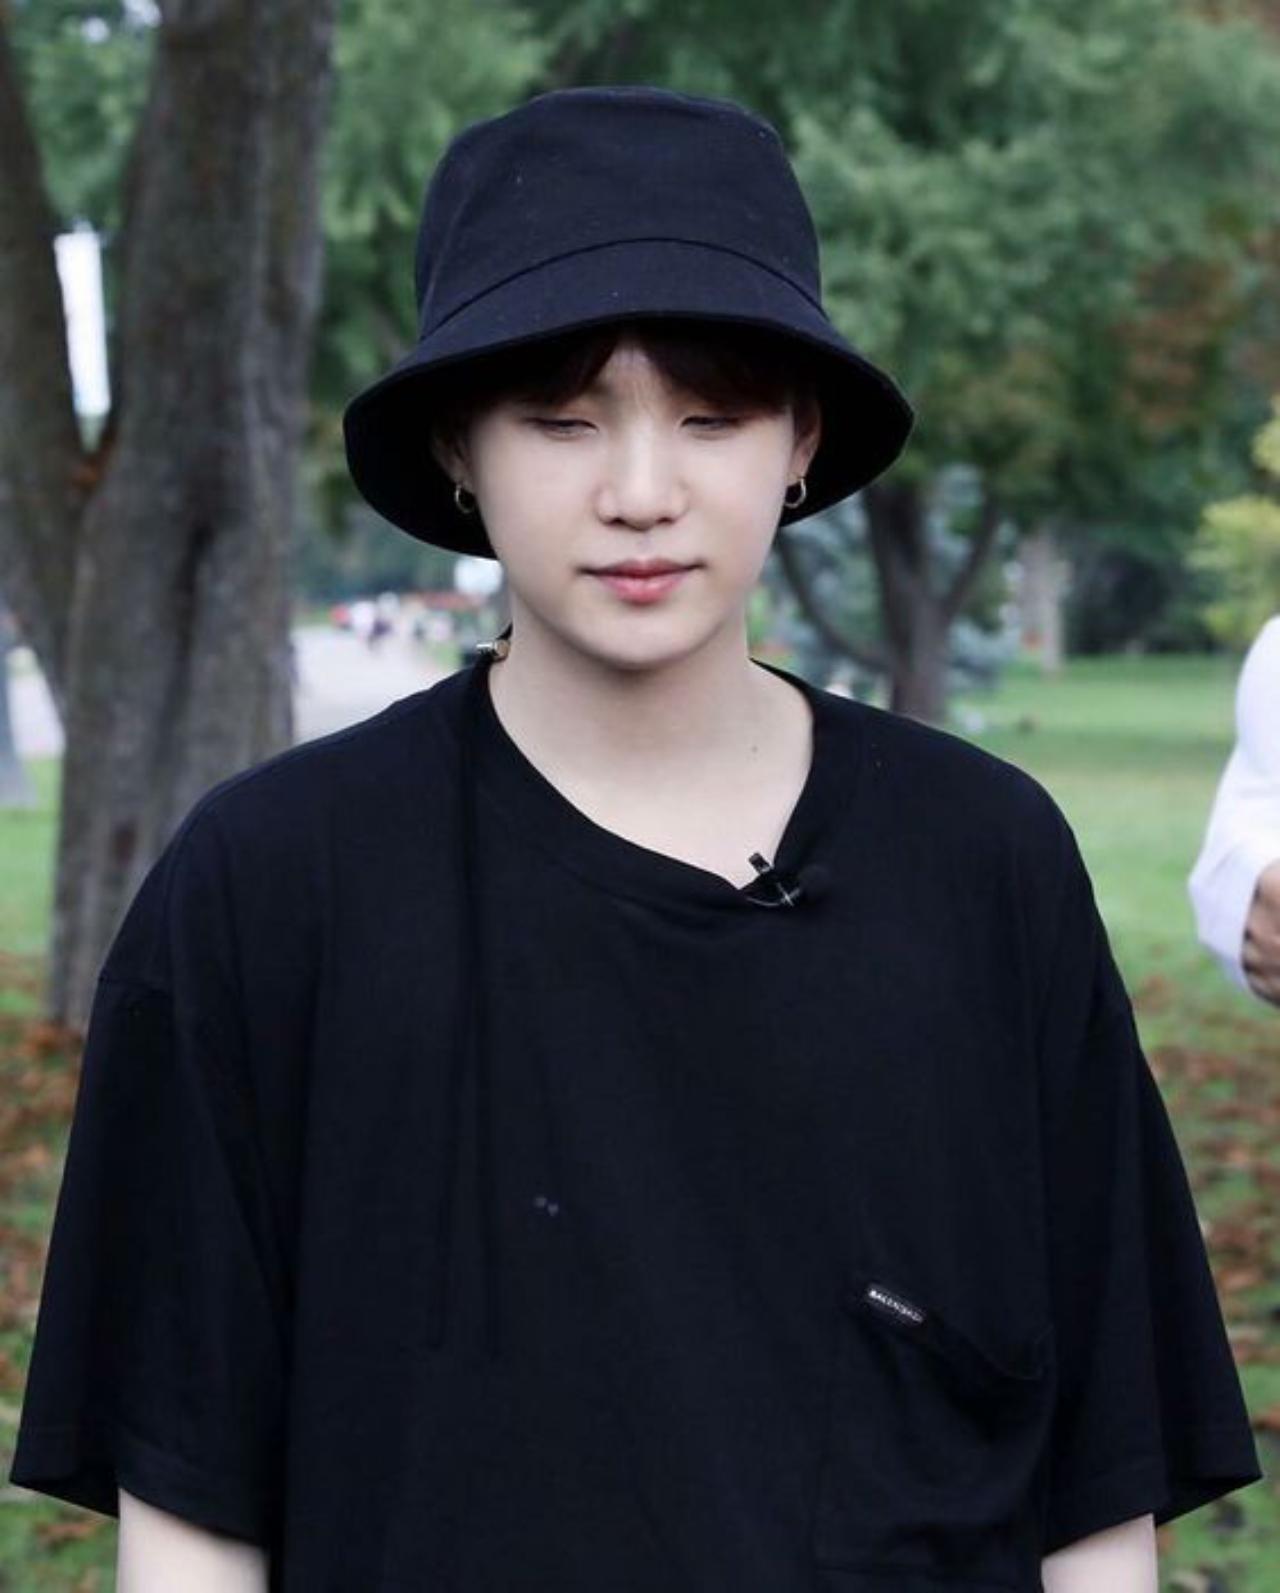 BTS inspired aesthetic outfit - Suga  Bts inspired outfits, Suga,  Aesthetic clothes